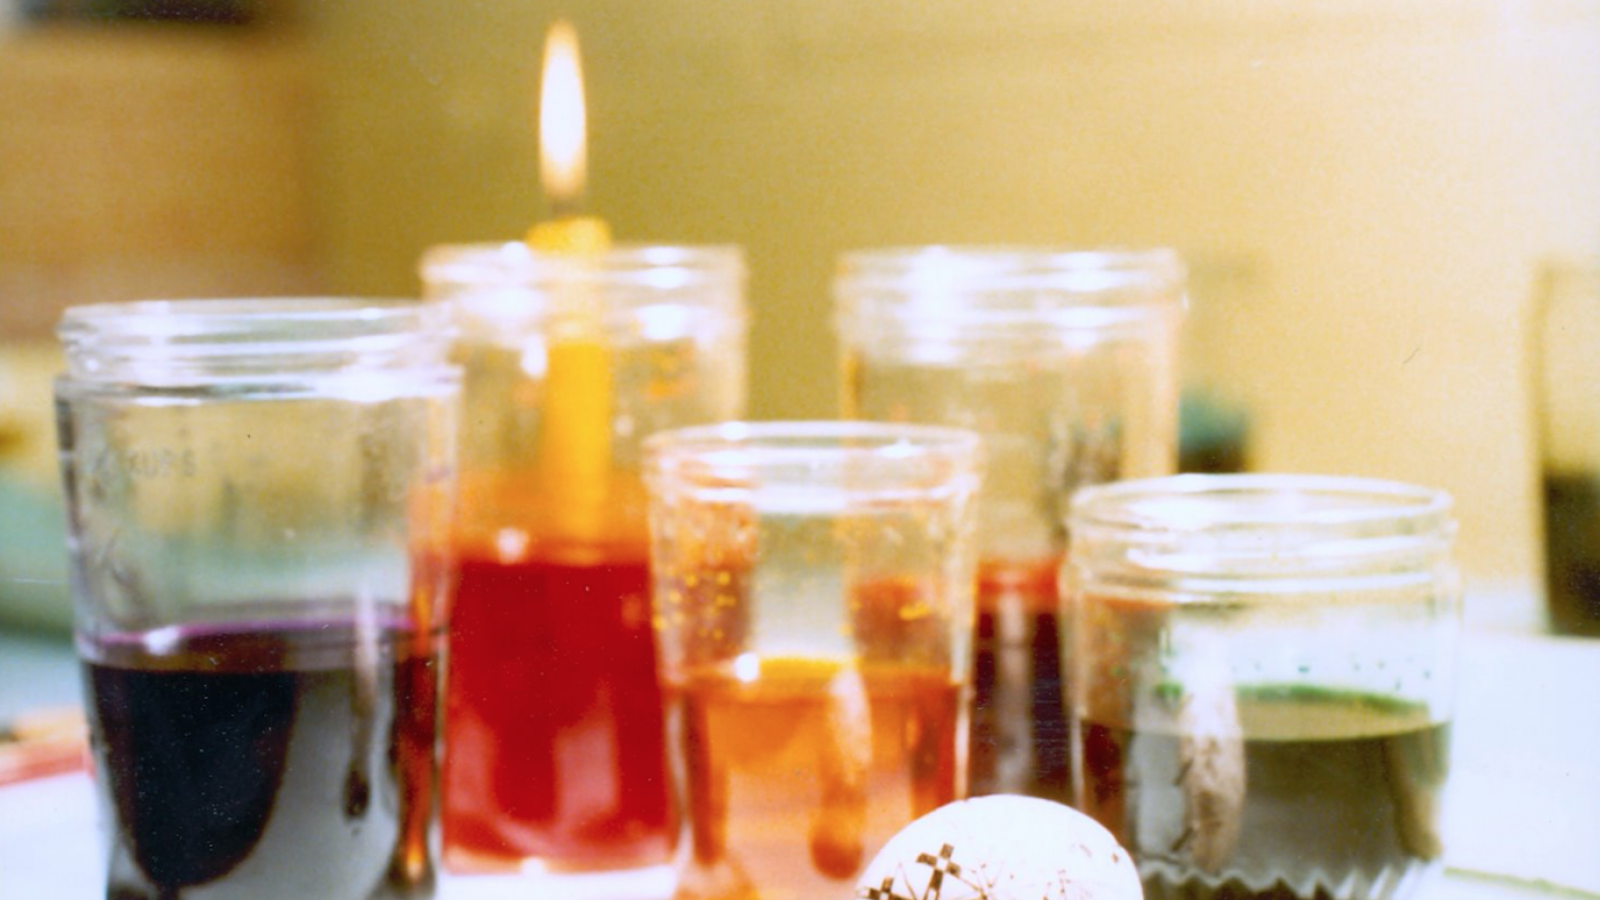 Dyes and candle used in Gary Byndas' egg decorating, Cleveland, 1979.